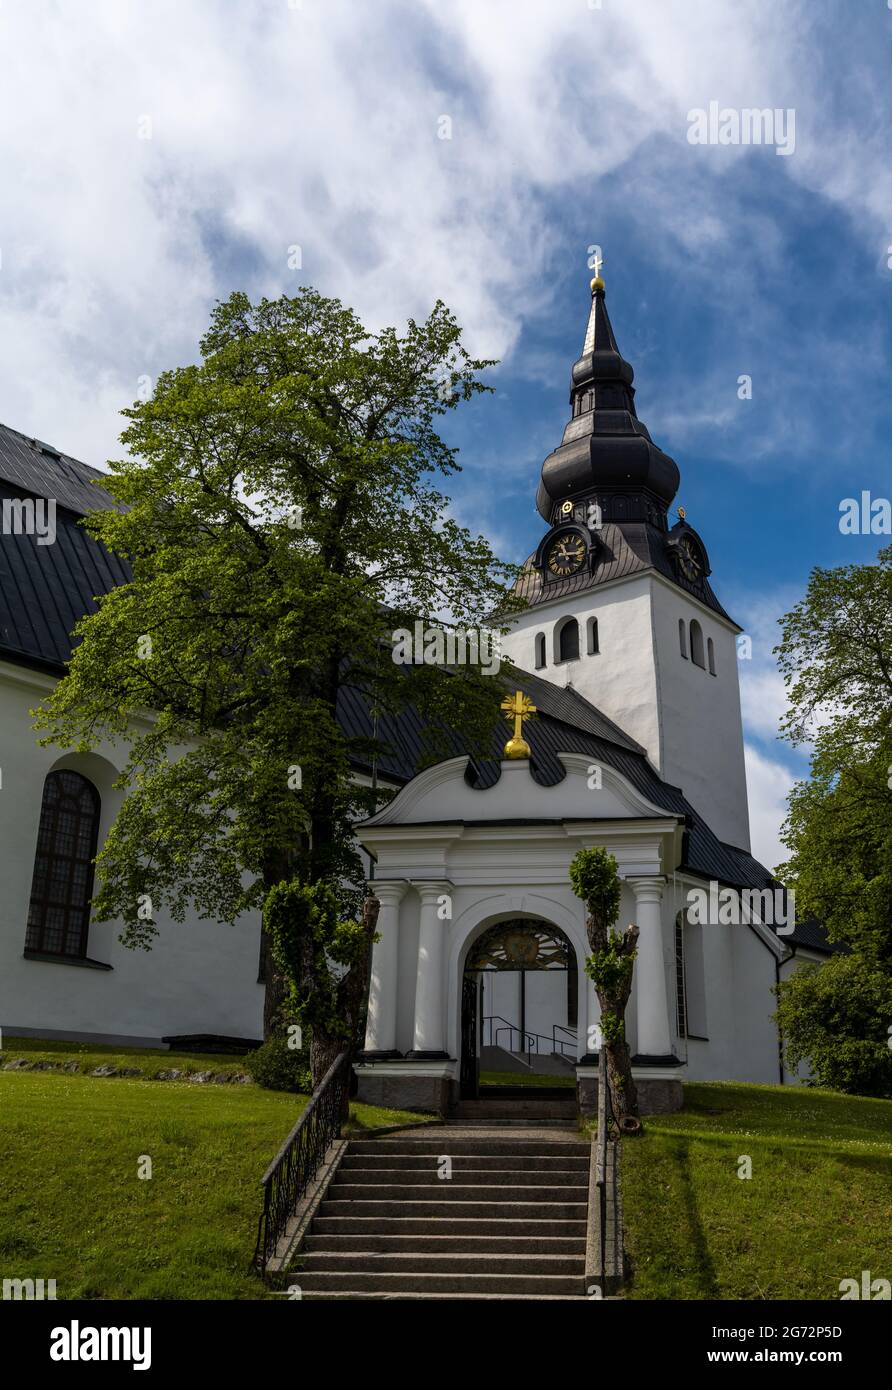 Hudiksvall, Sweden - 7 July, 2021: view of the 17th-century Hudiskvall church in the town center Stock Photo